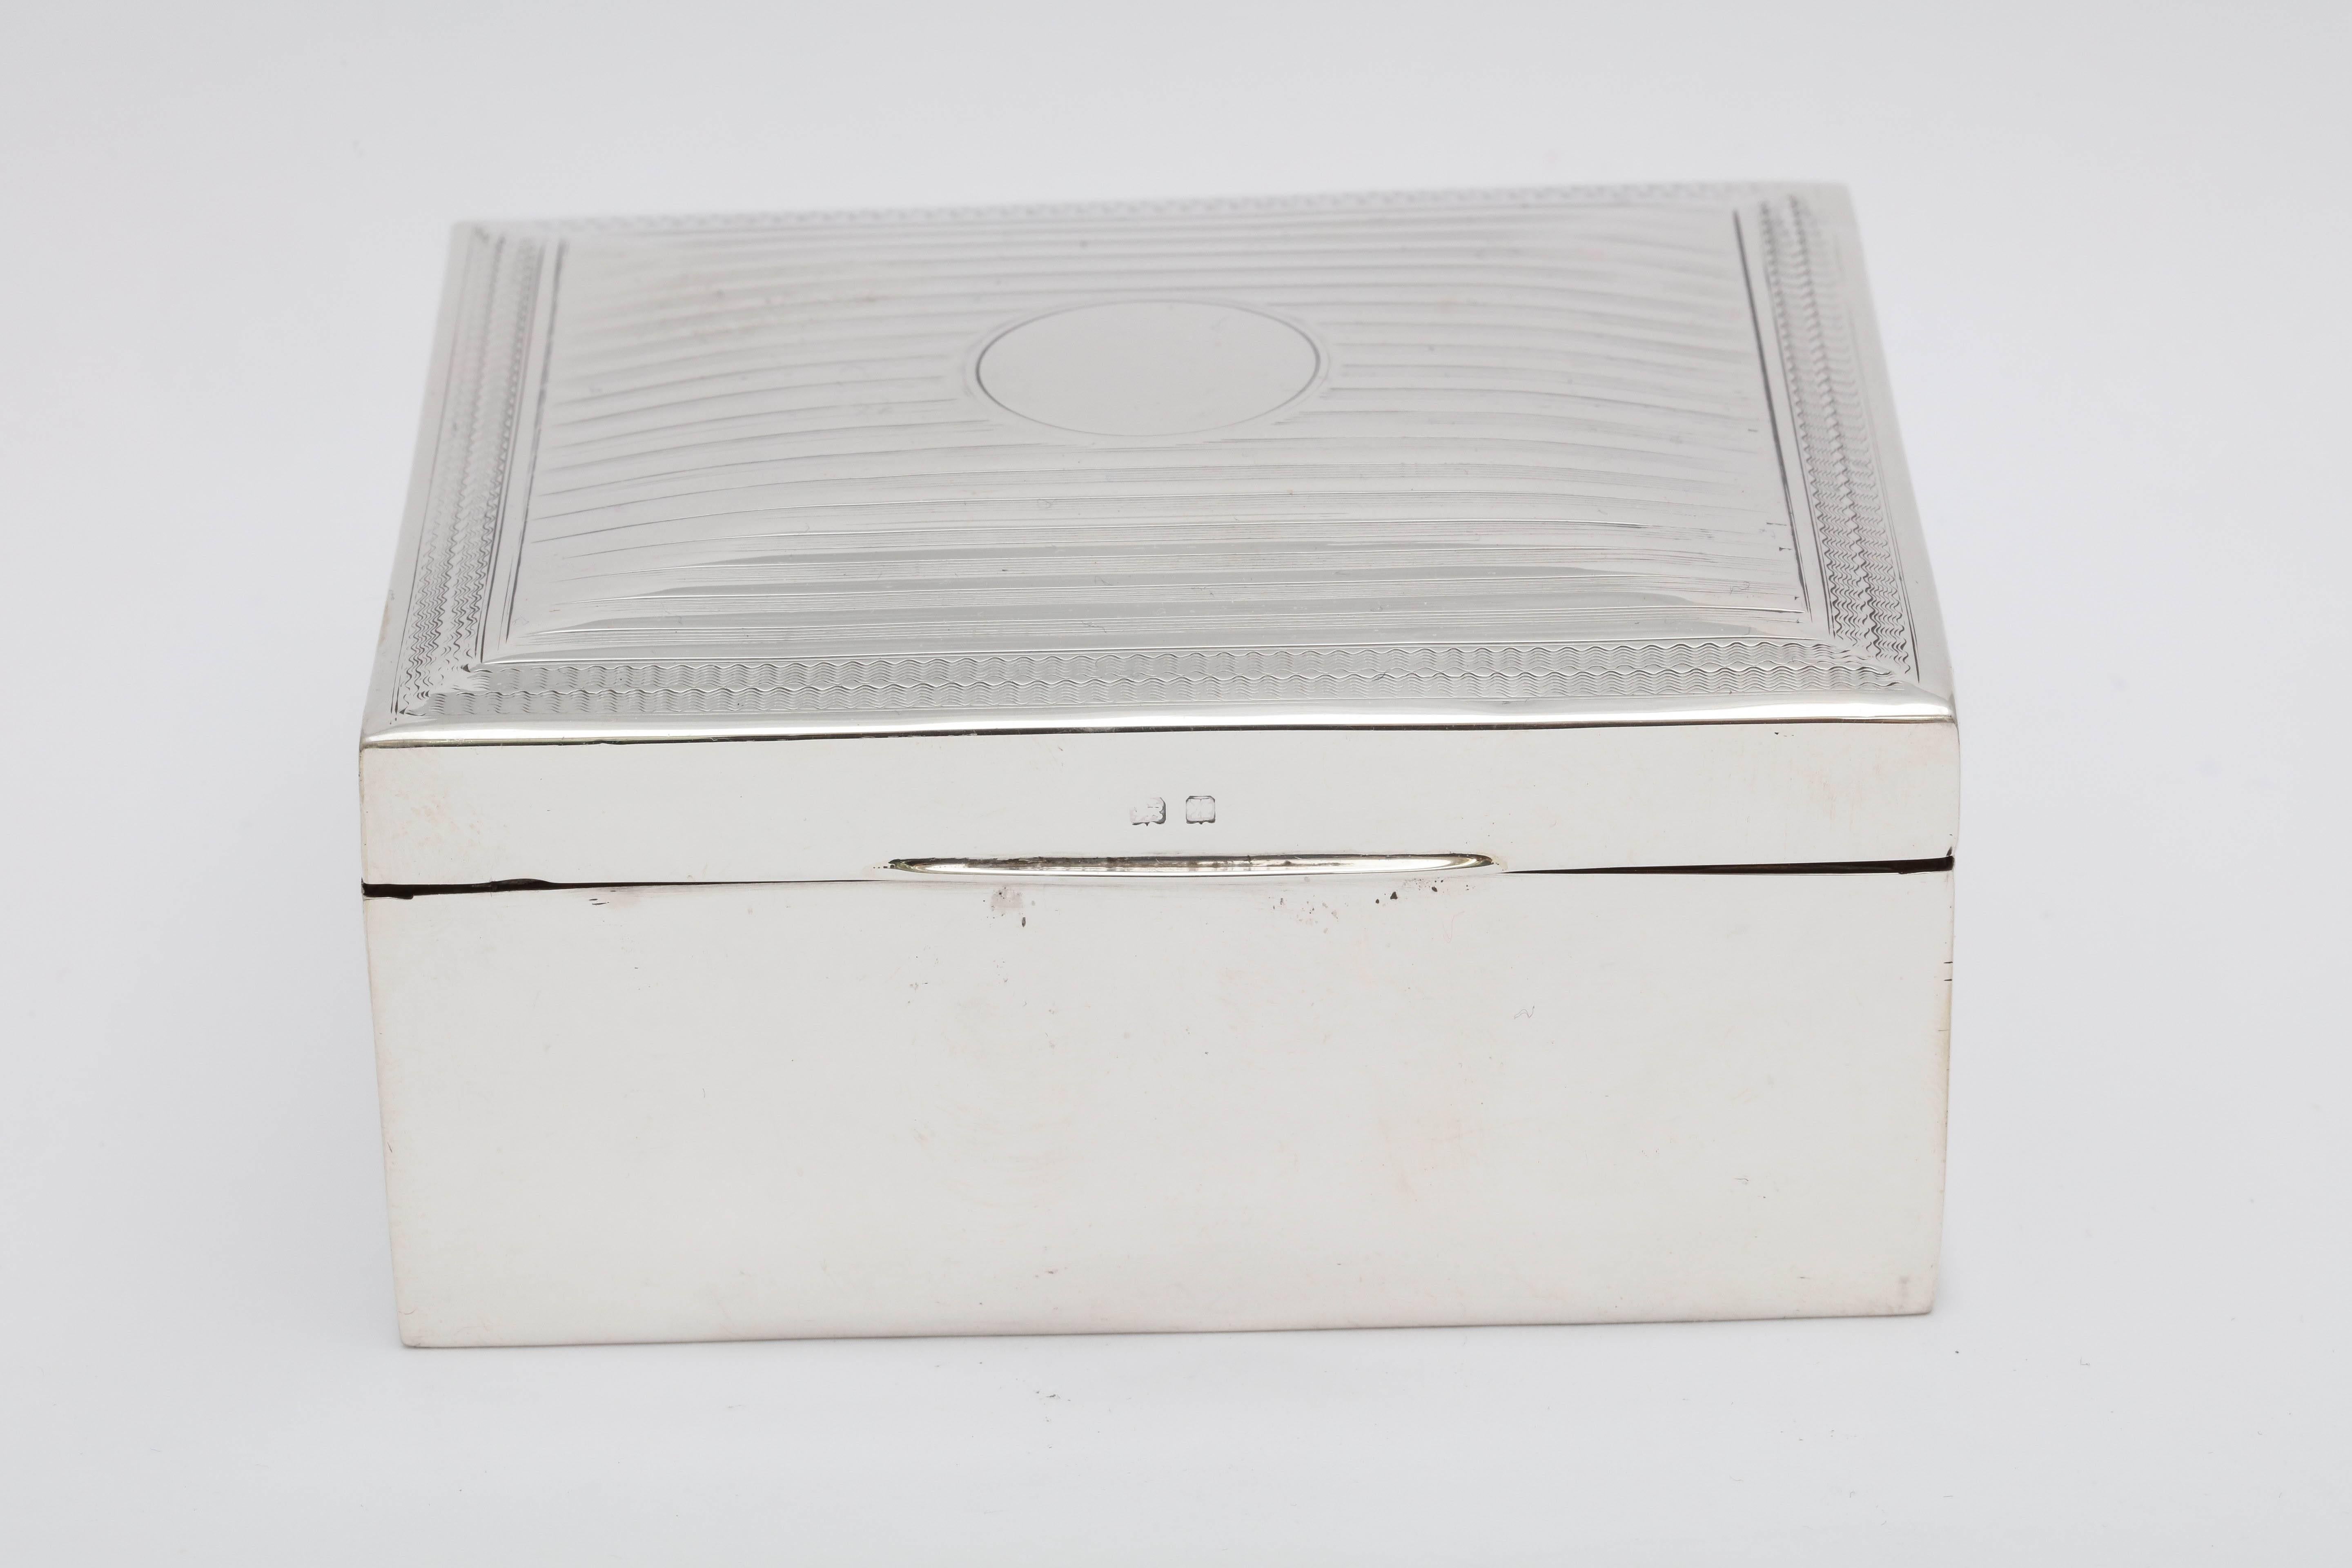 Art Deco, sterling silver, Tuxedo striped table box, Birmingham, England, 1922, H.C. Davis - maker. Wood lined; leather underside. Vacant cartouche. Measures: 4 inches wide x 3 1/2 inches deep x almost 2 inches high. Some small dints in underside